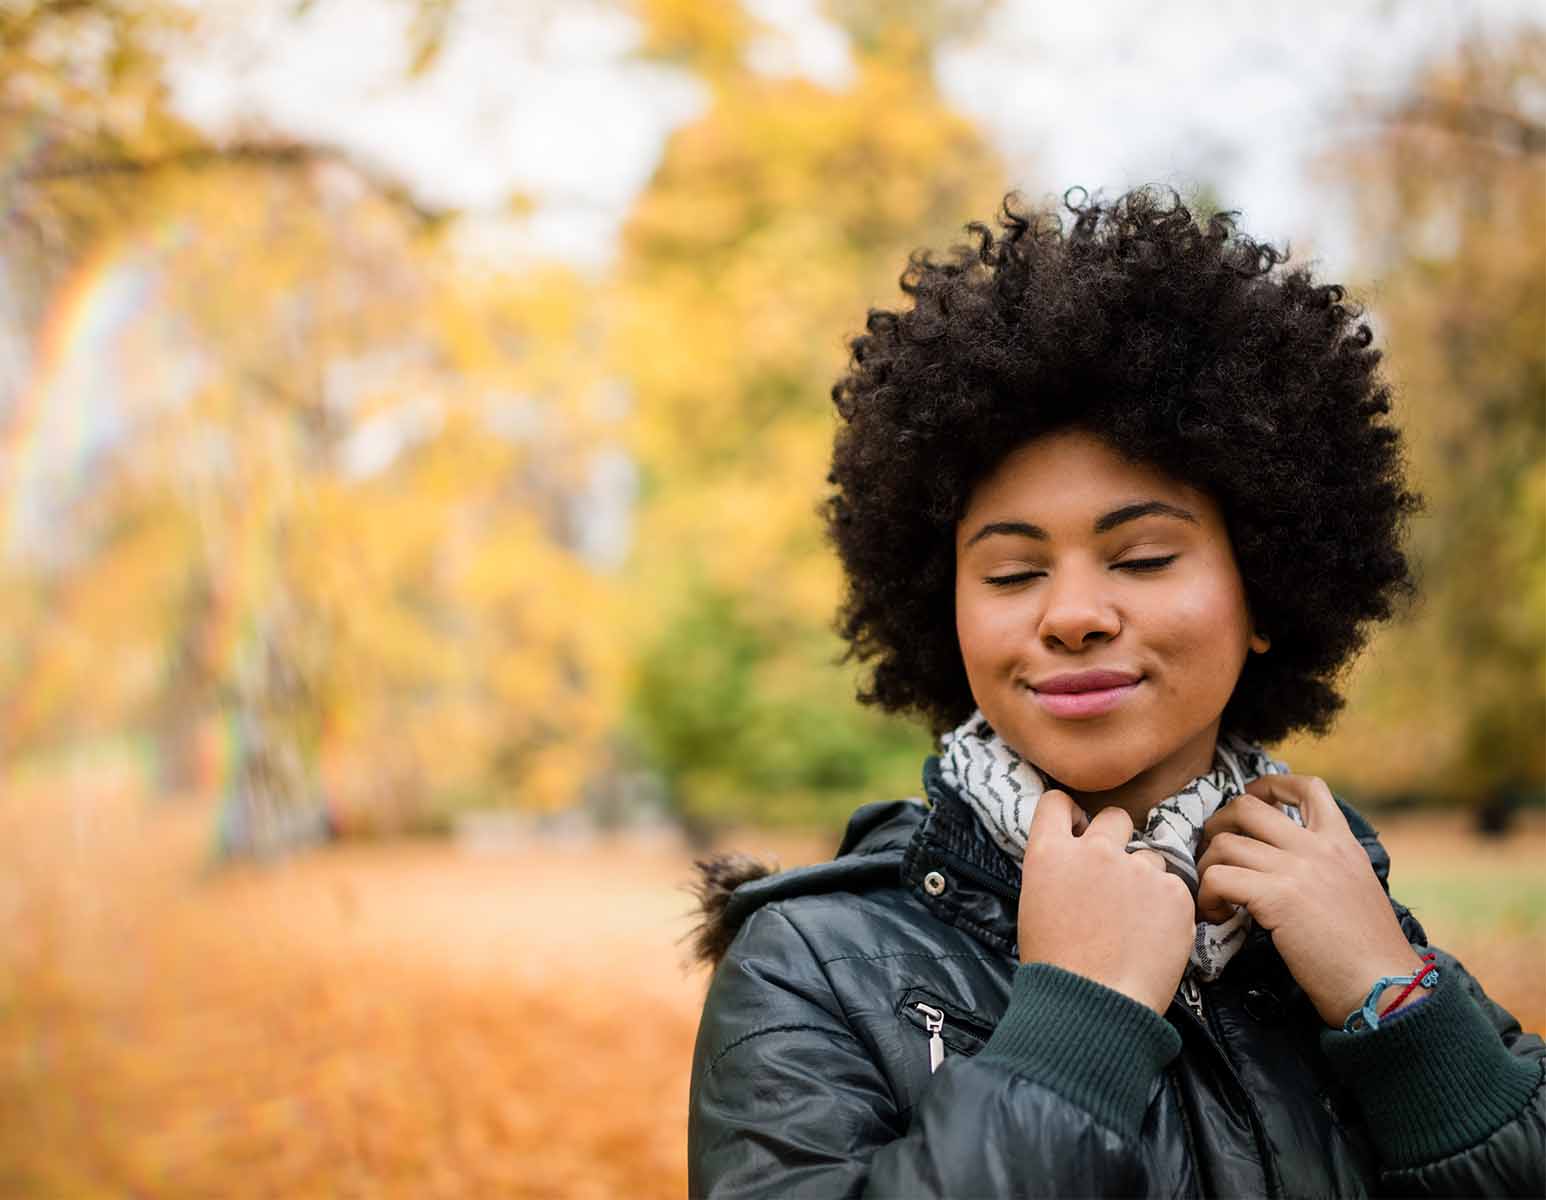 Woman smiling outdoors in autumn